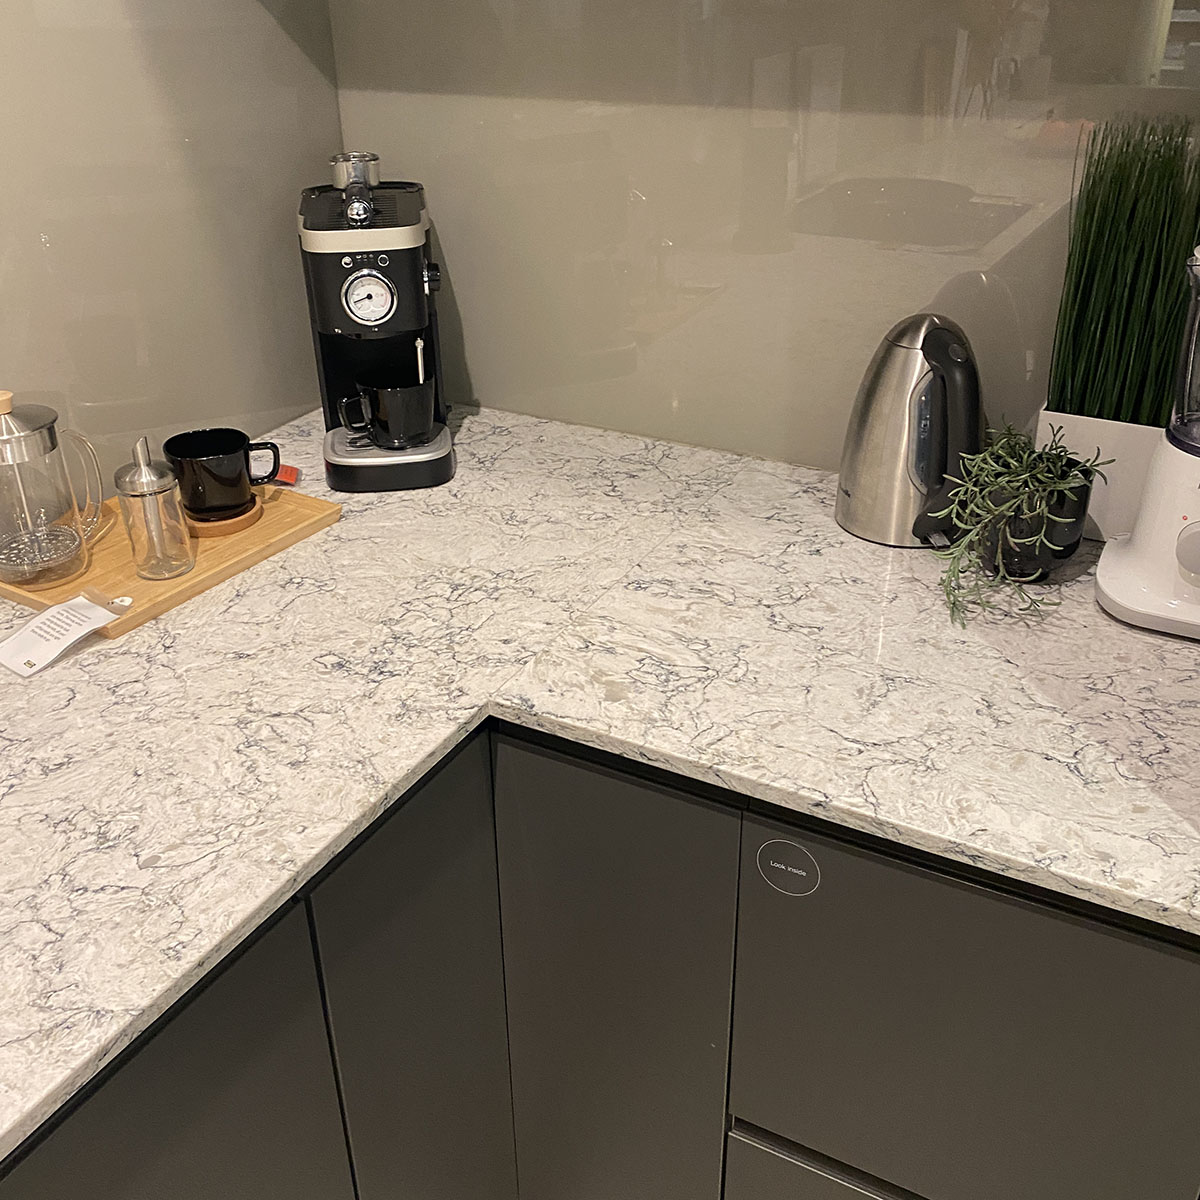 ikea benchtops - is that the stone one?